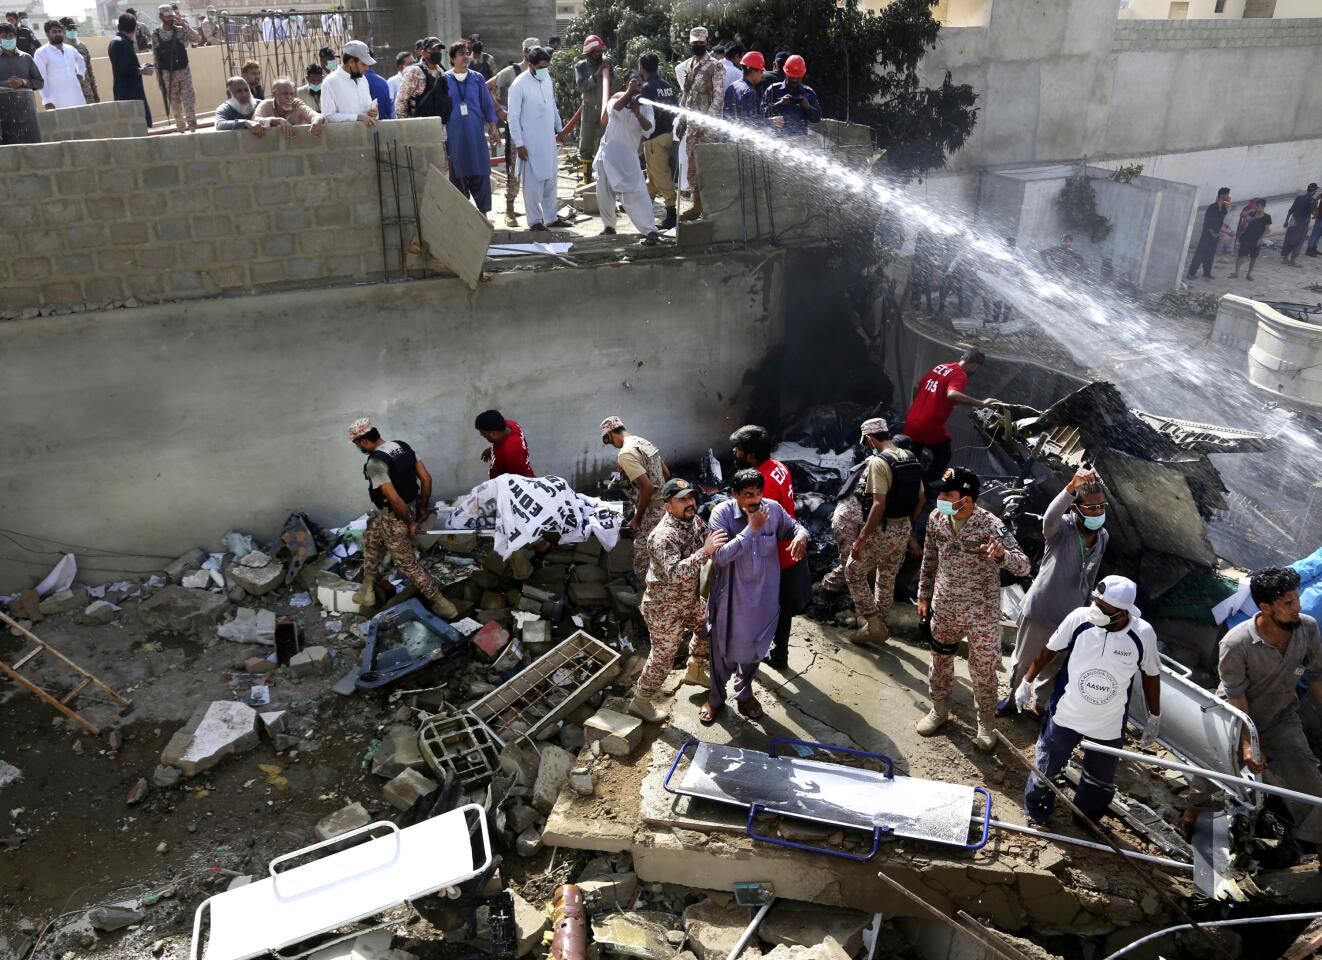 A victim's body is removed from the wreckage of a Pakistani airliner that crashed Friday in a neighborhood in Karachi.